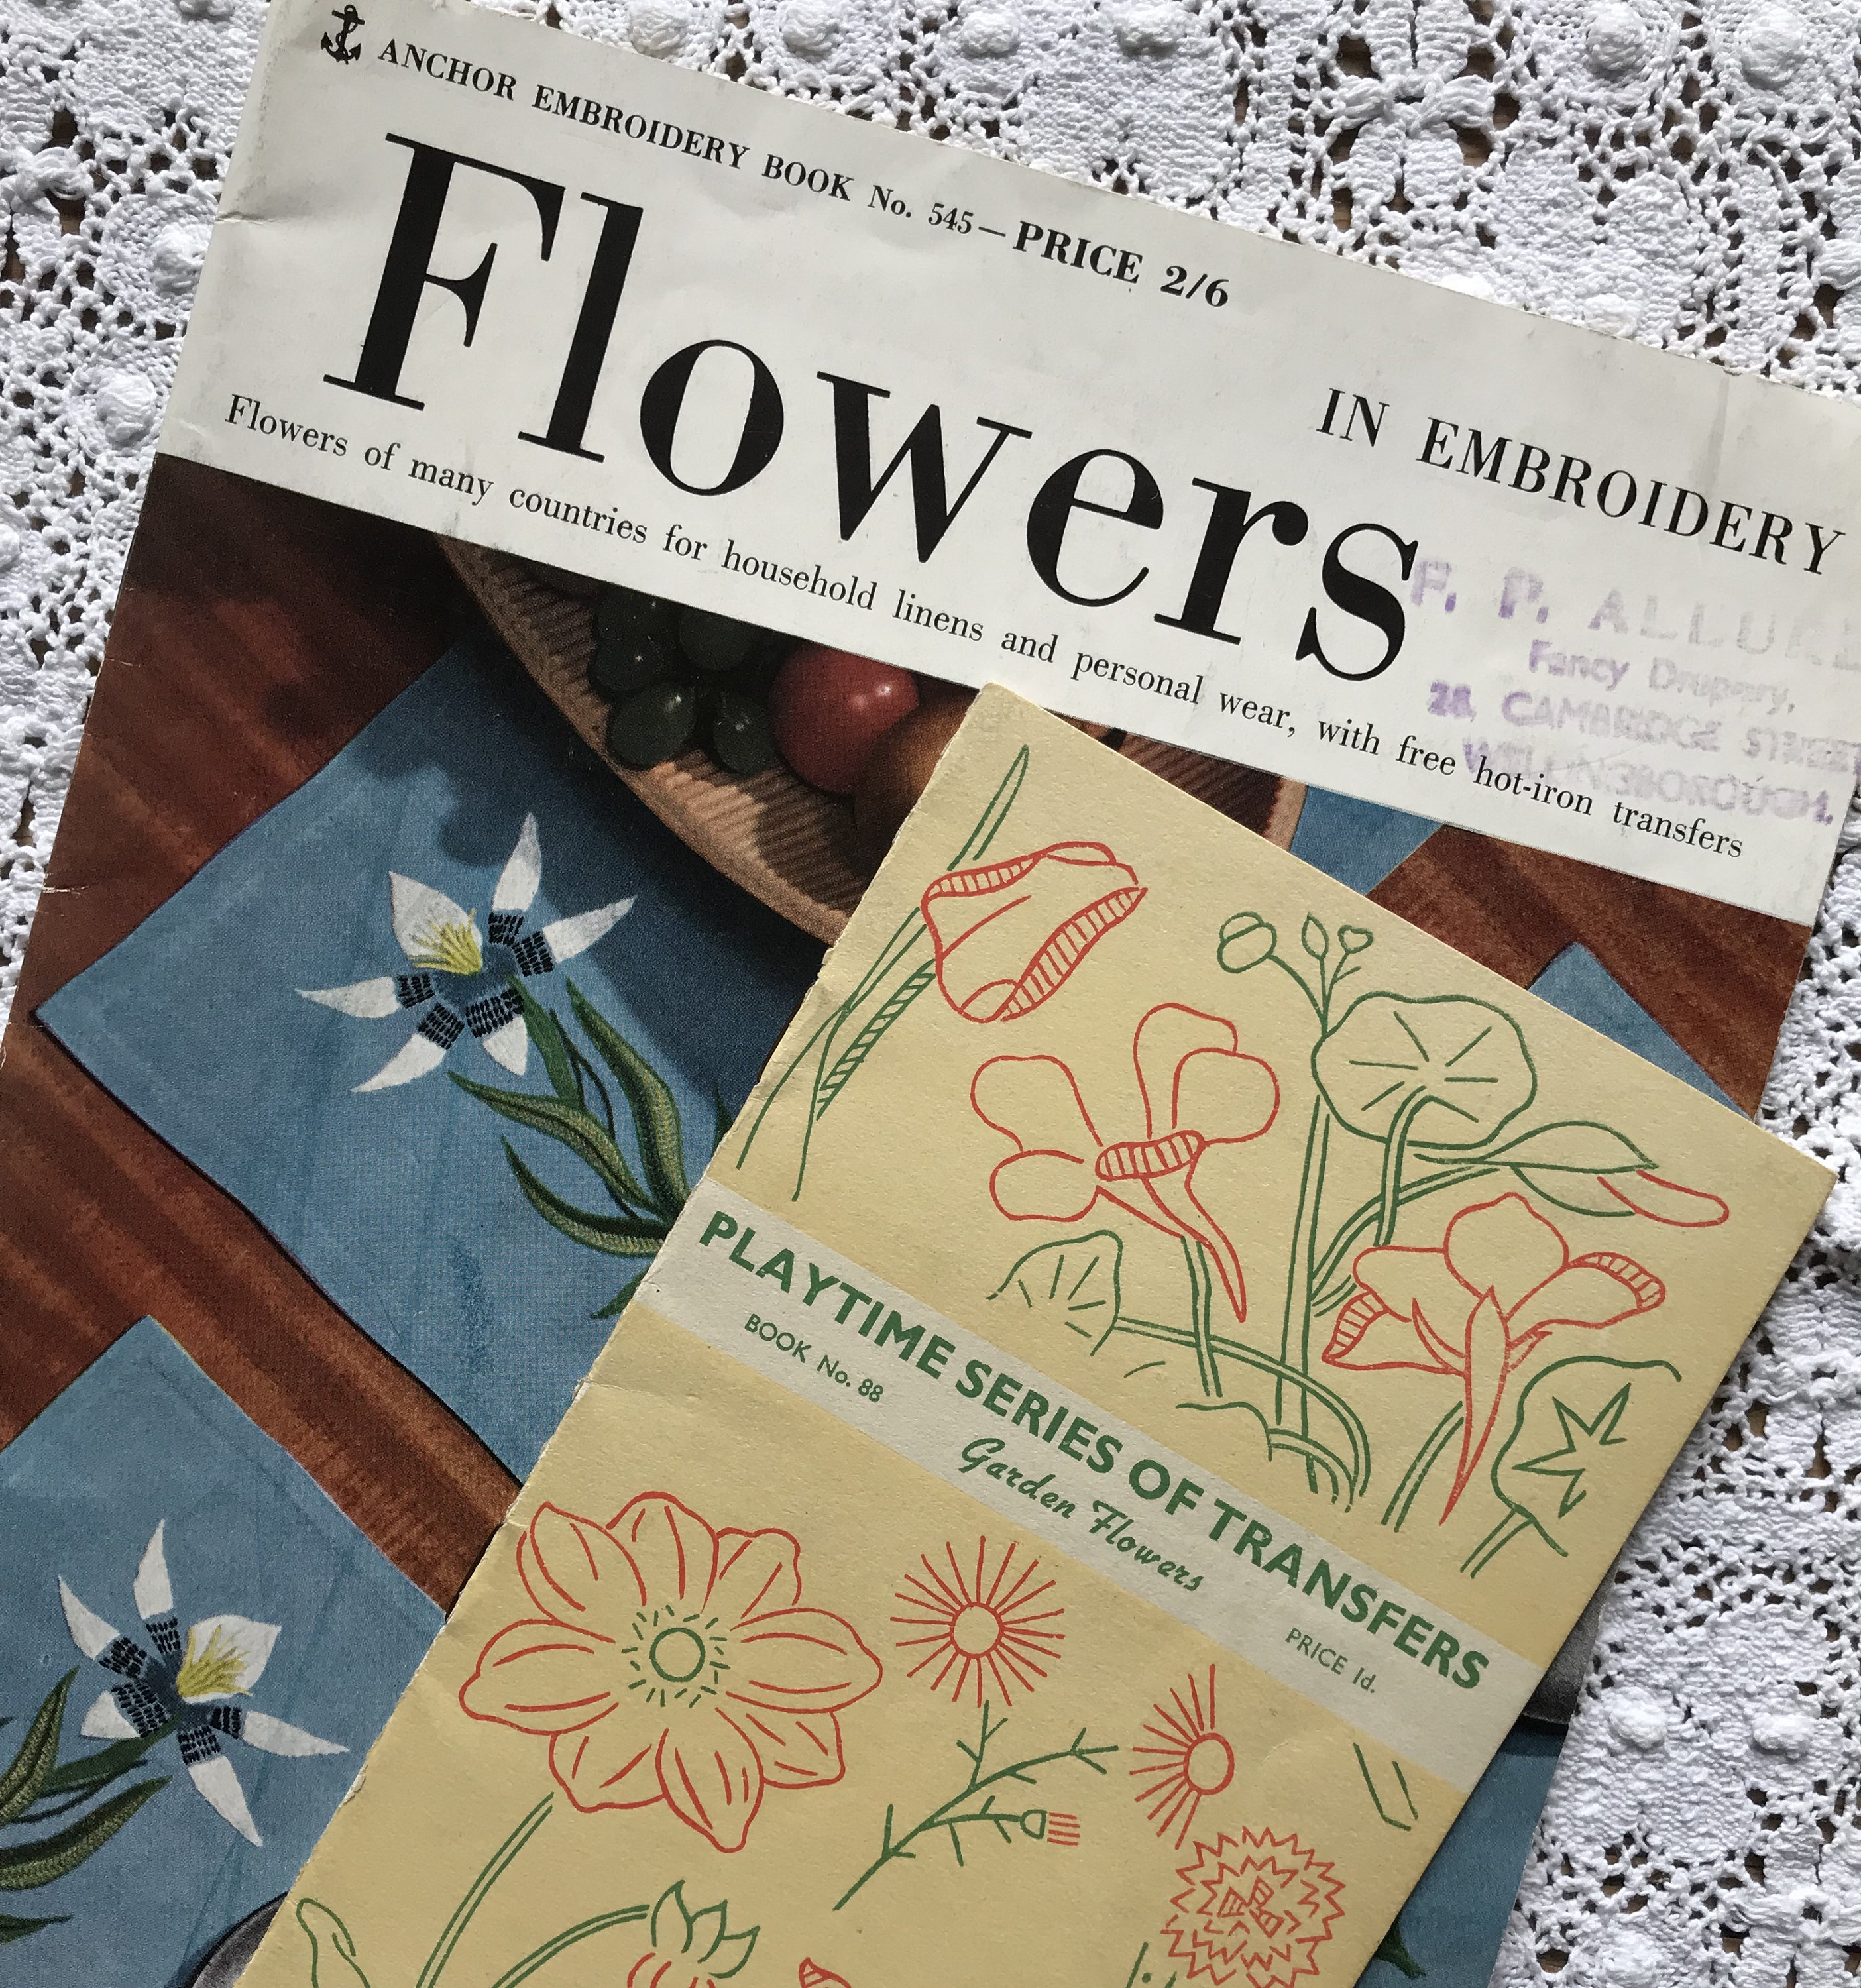 Embroidery Pattern Books Two Vintage Embroidery Patterntransfer Books Flowers Slow Stitching Floral Embroidery Iron On Transfers Embroidery Stitches